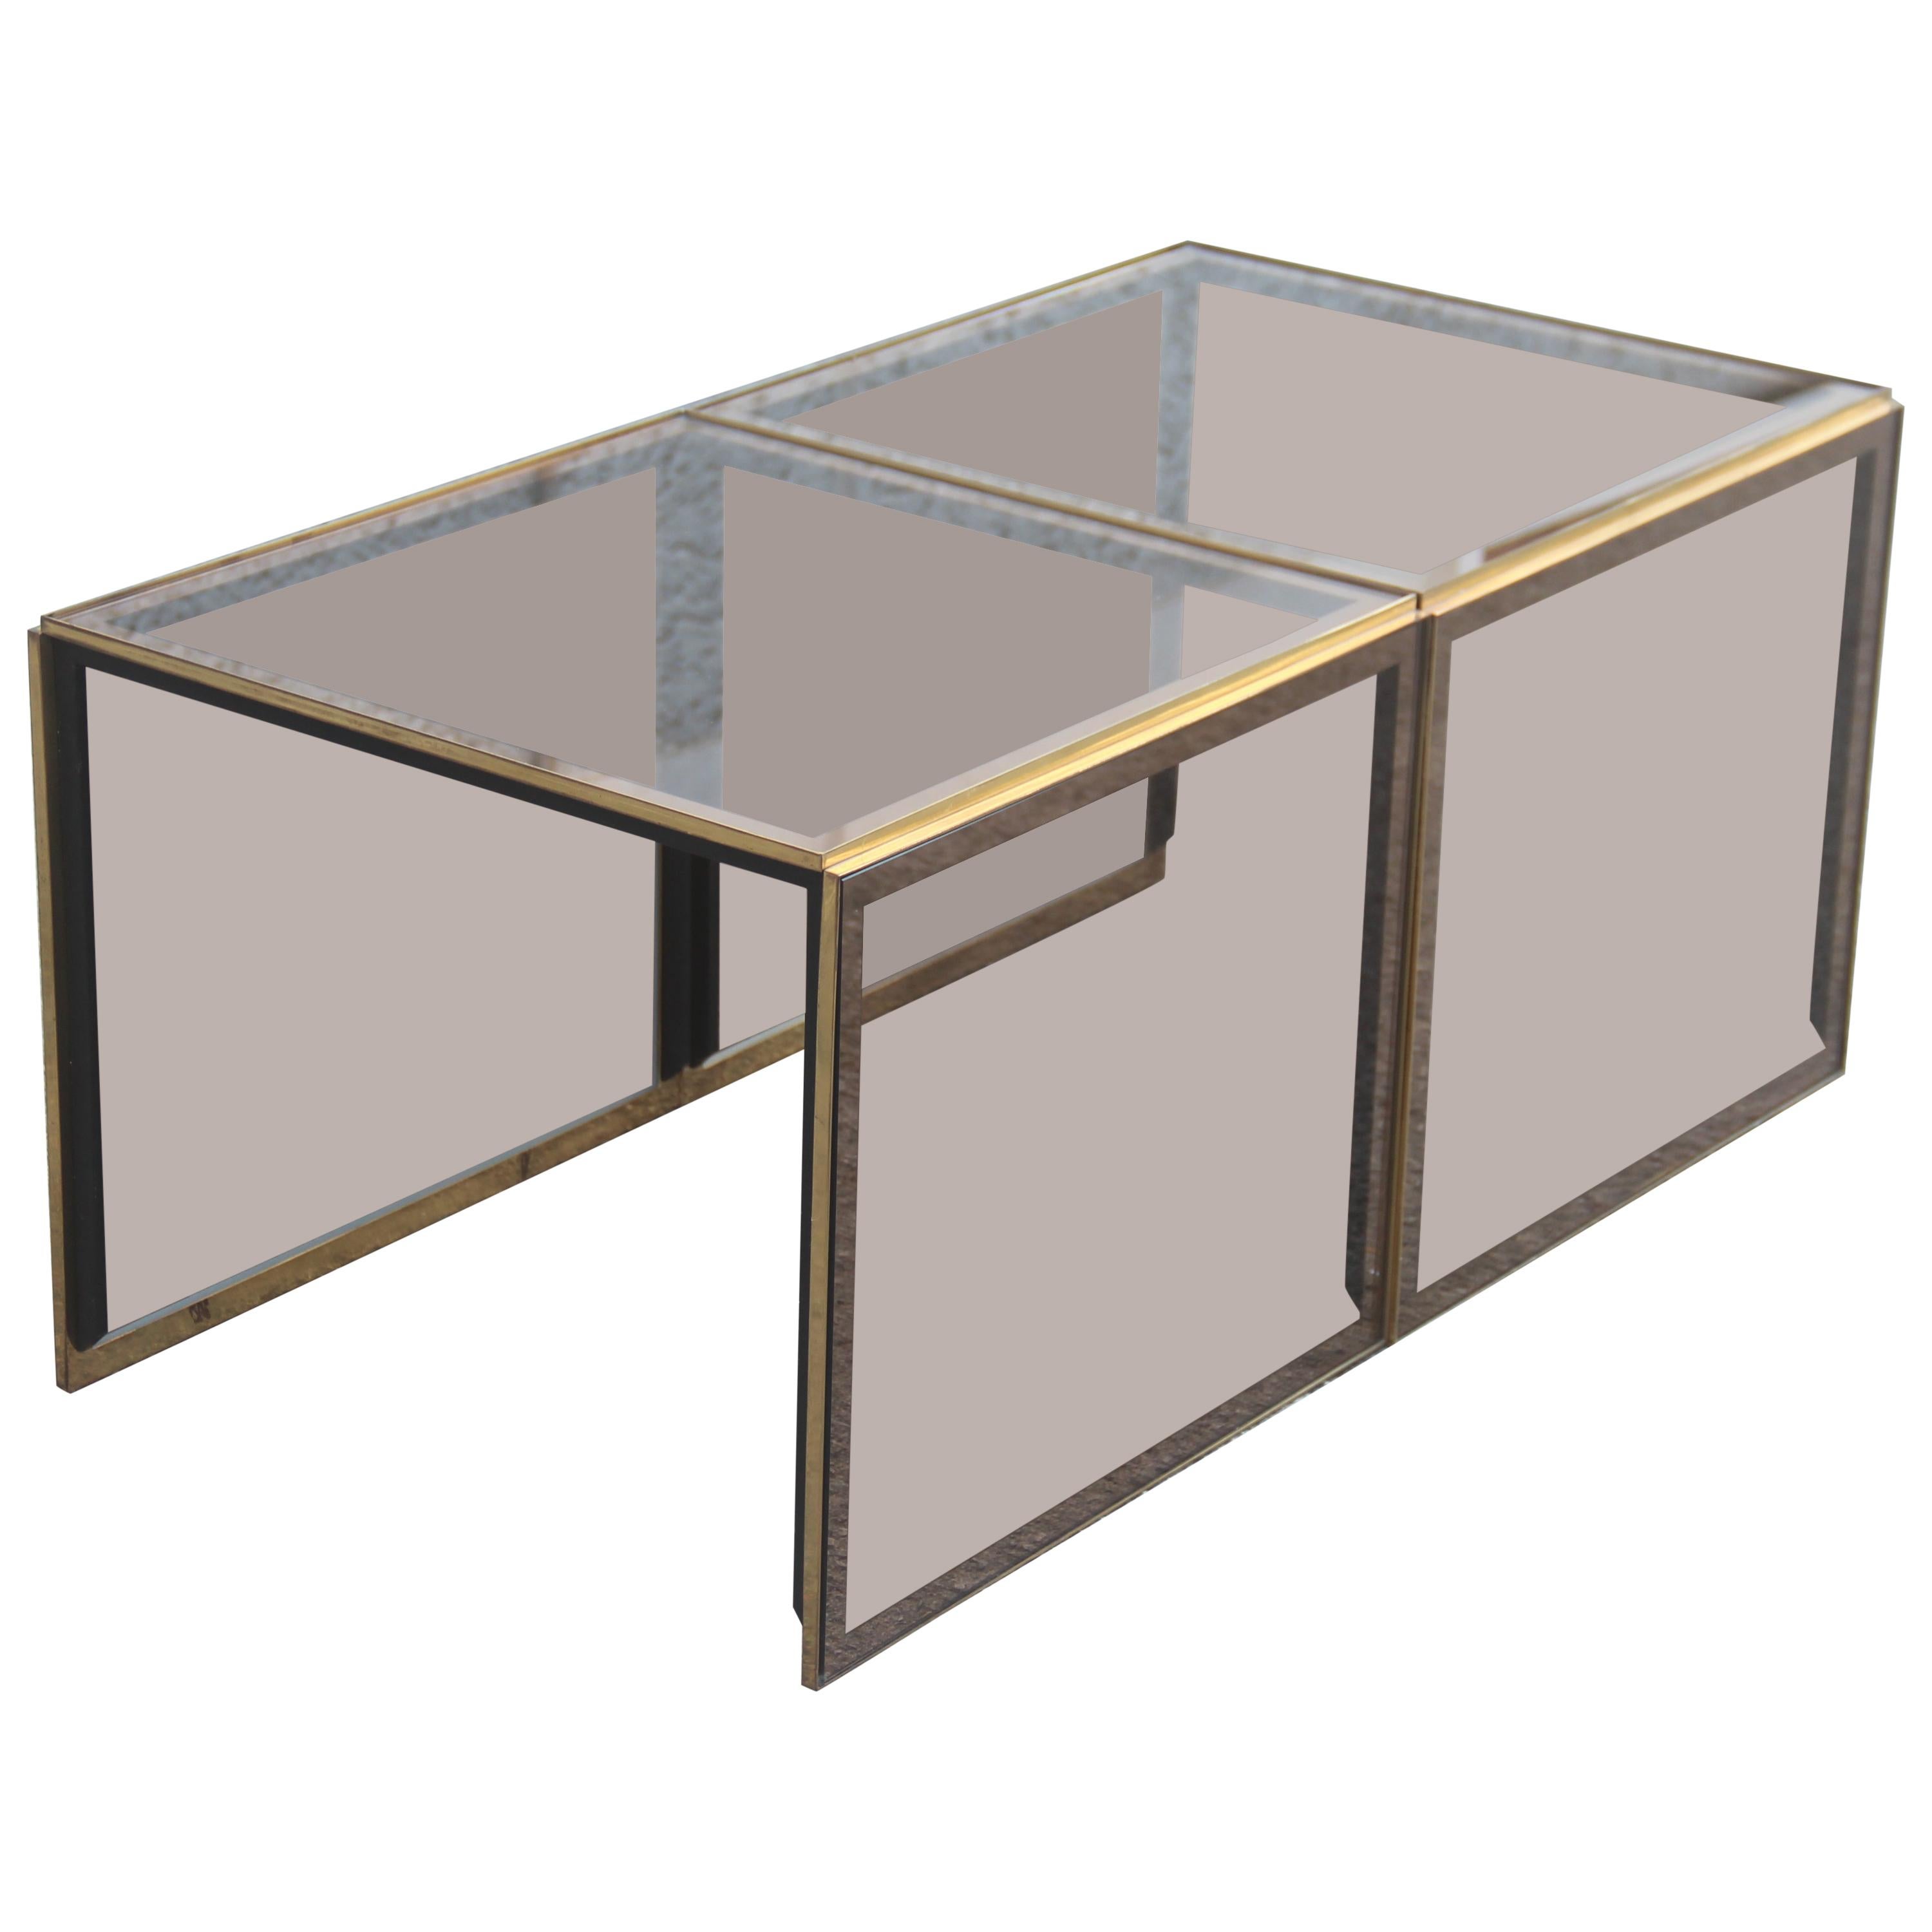 Stackable Coffee Tables in Mirrored Golden Brass Glass with a Square Shape 1970s